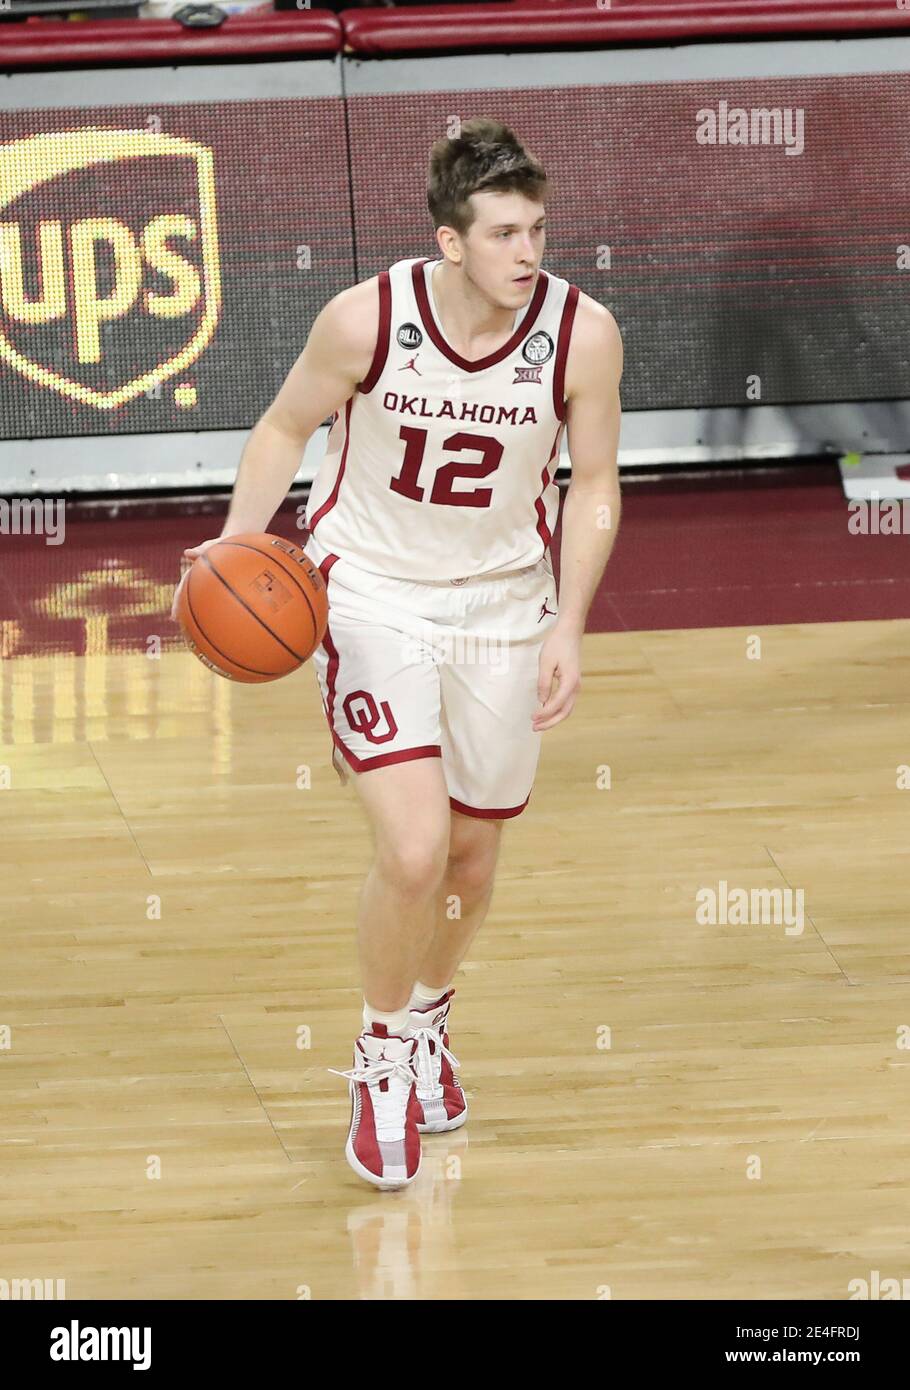 Norman, OK, USA. 23rd Jan, 2021. Oklahoma Sooners guard Austin Reaves (12) dribbles the ball during a basketball game between the Kansas Jayhawks and Oklahoma Sooners at Lloyd Noble Center in Norman, OK. Gray Siegel/CSM/Alamy Live News Stock Photo